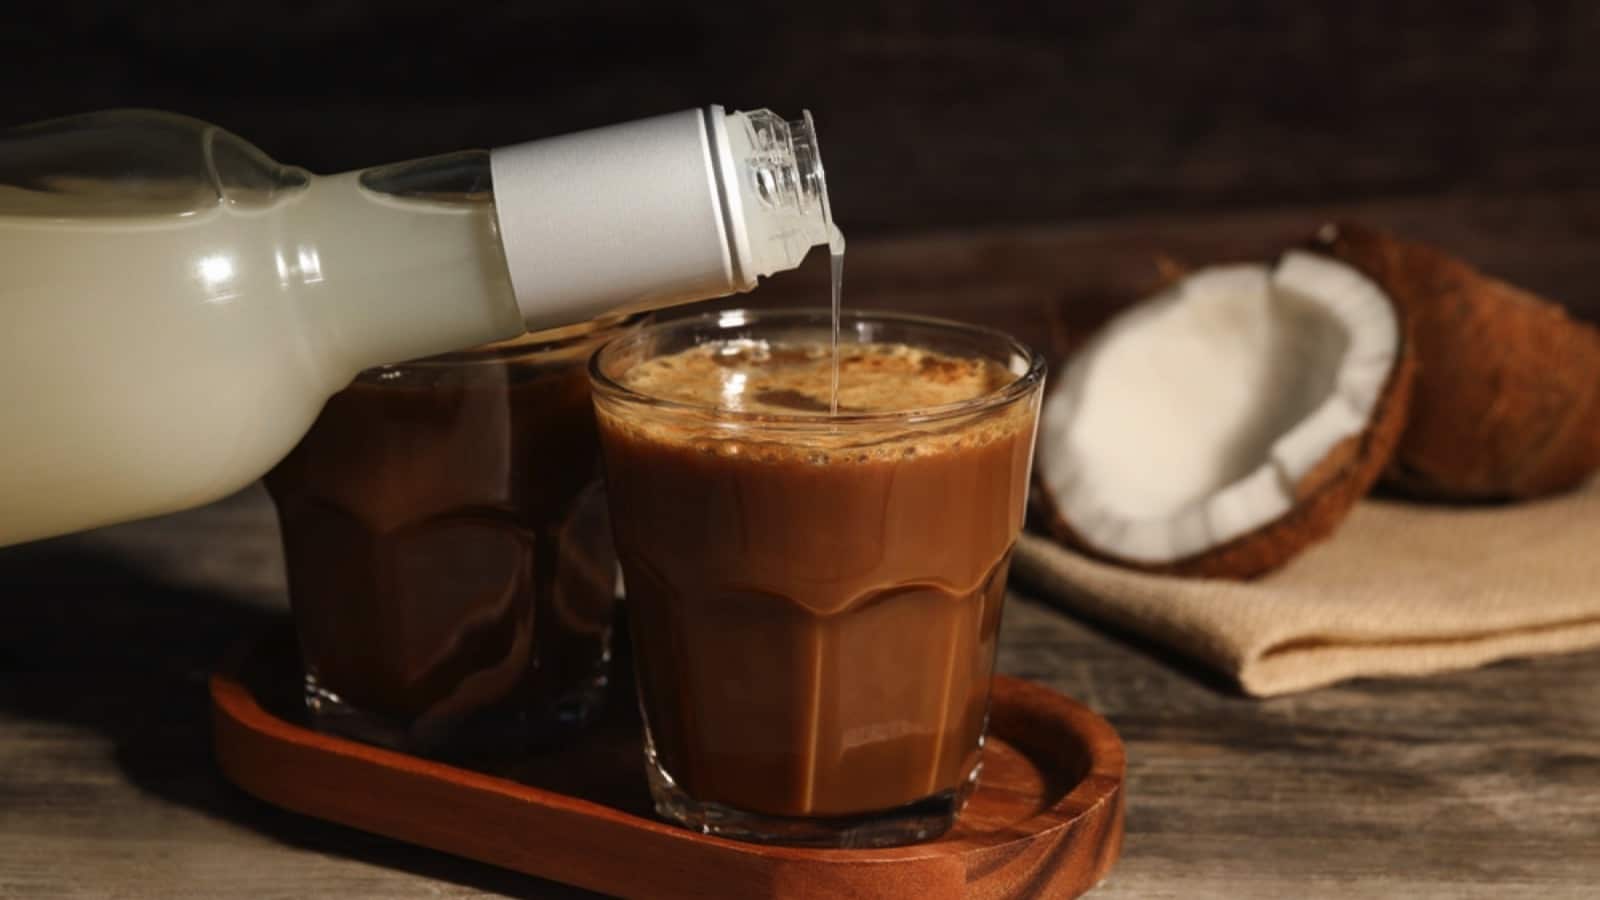 Pouring coconut syrup into glass with tasty coffee